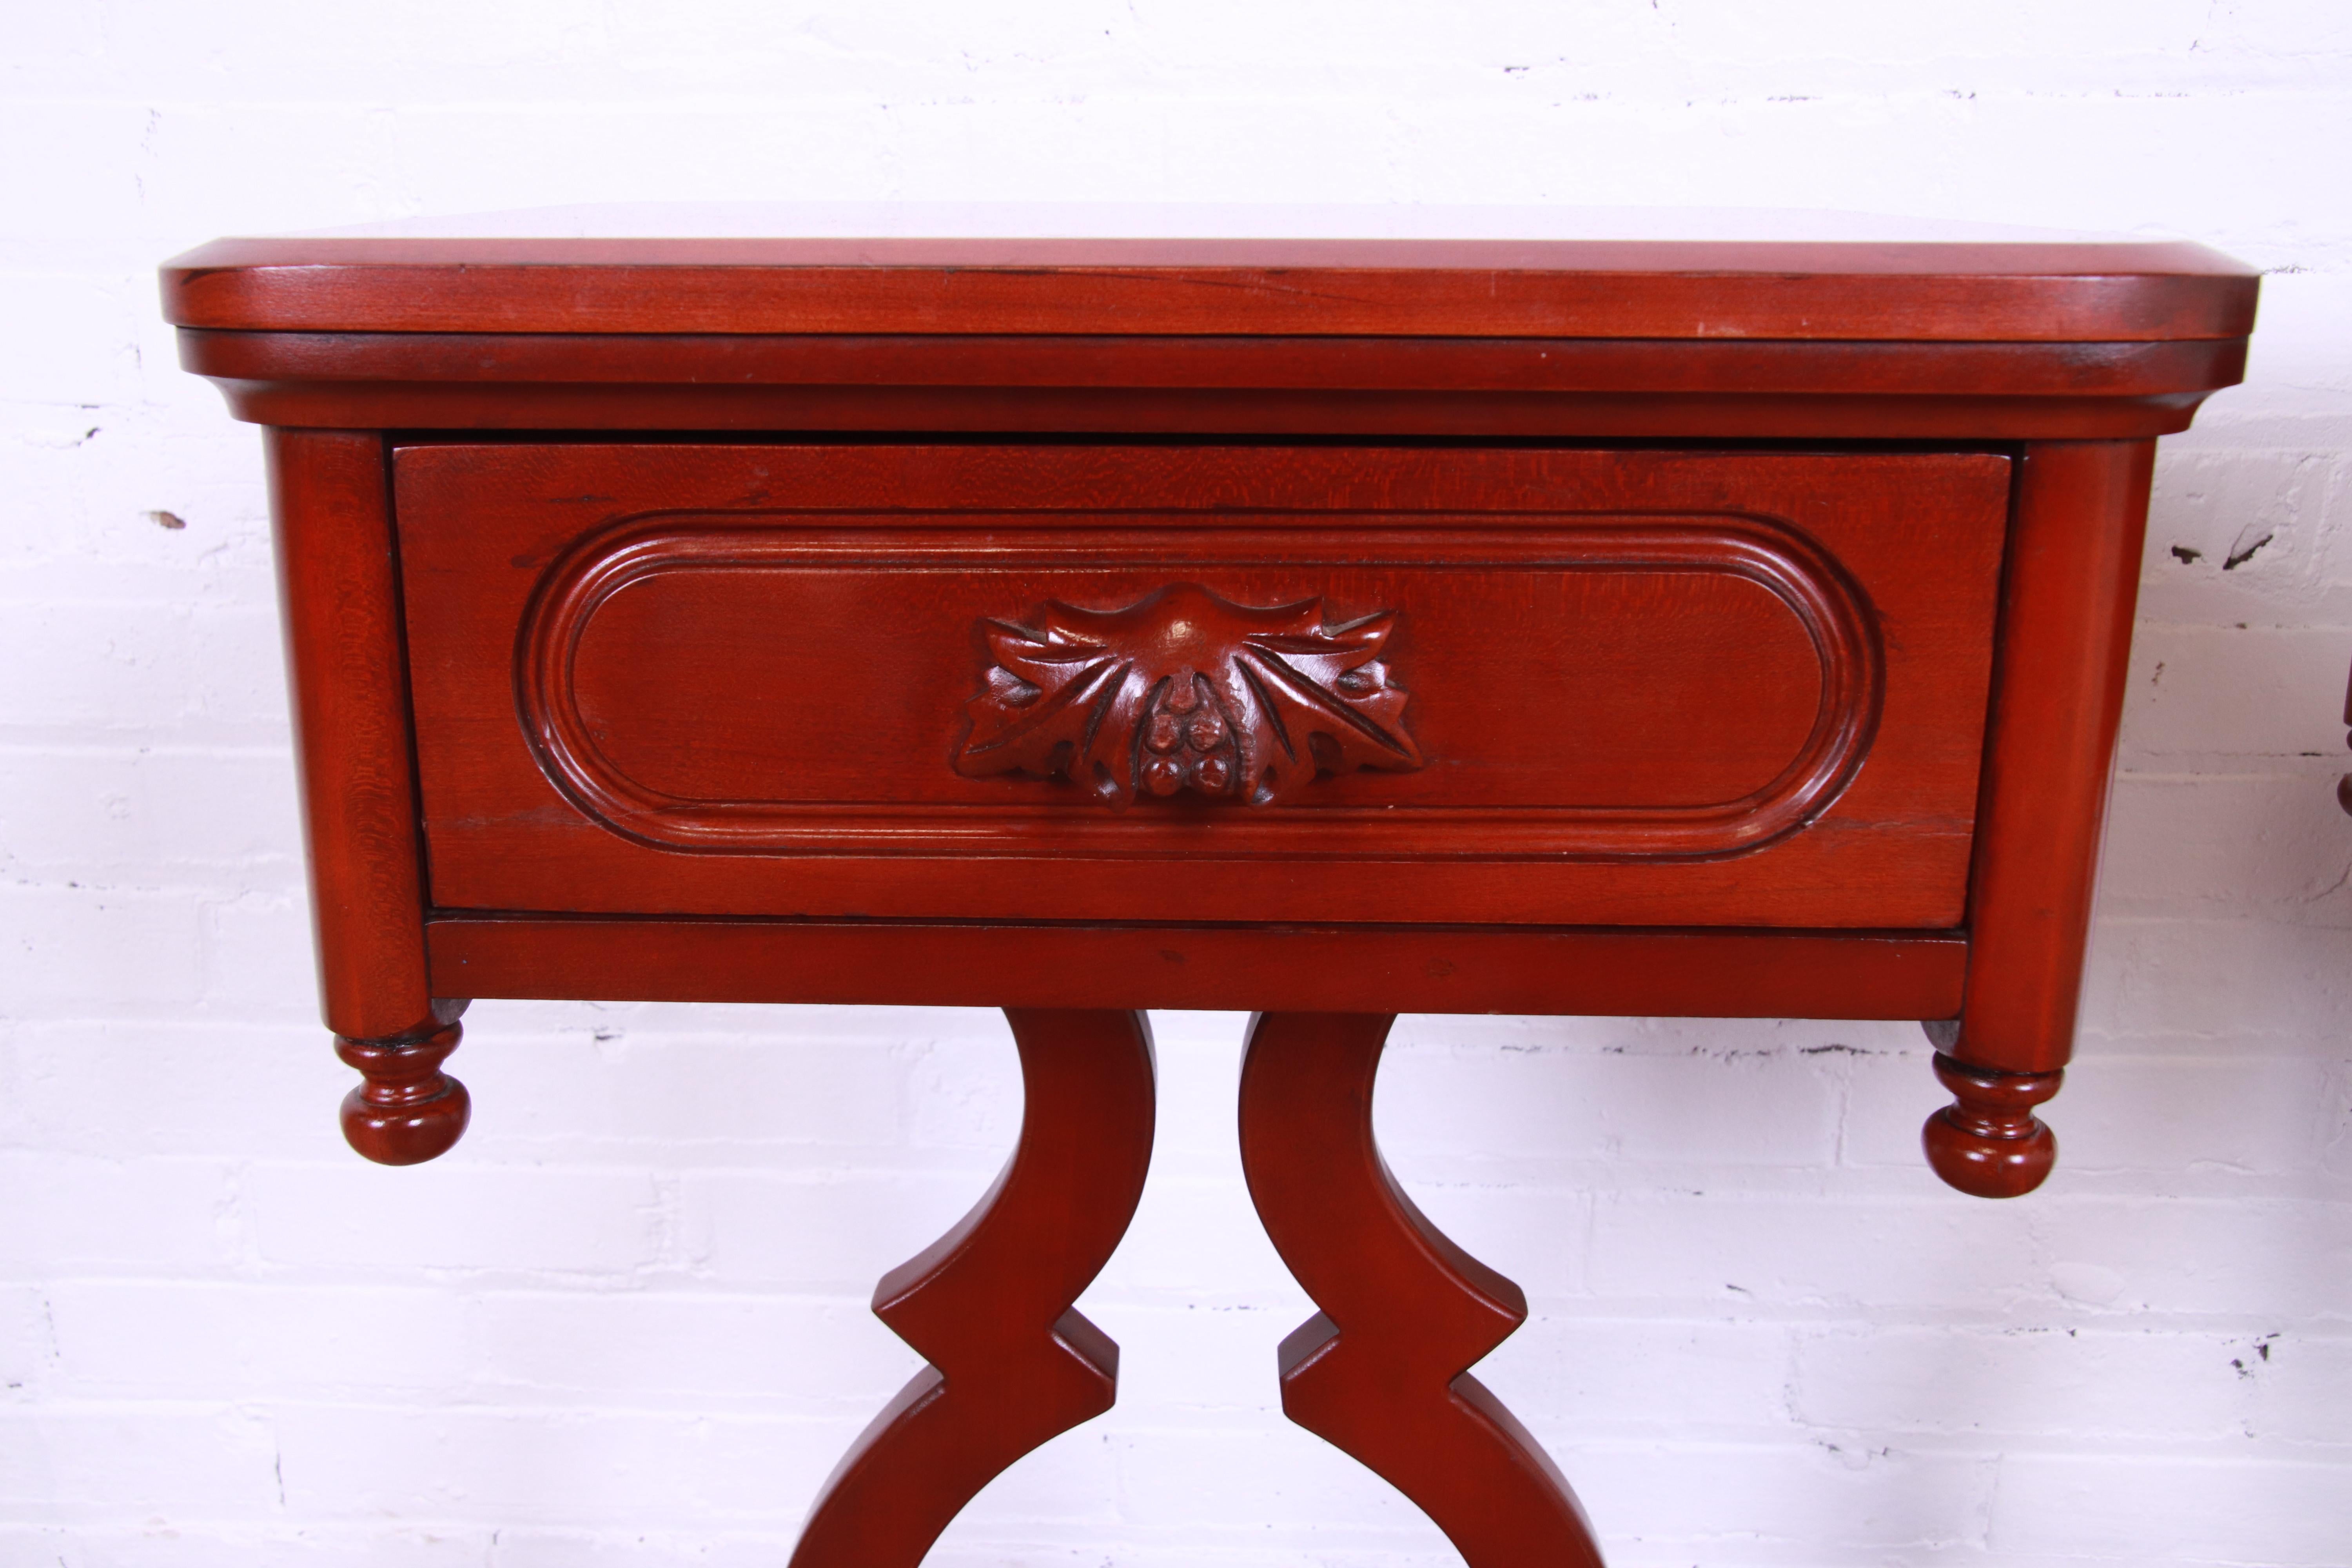 Lillian Russell Collection Victorian Cherry Nightstands by Davis Cabinet Co. 2